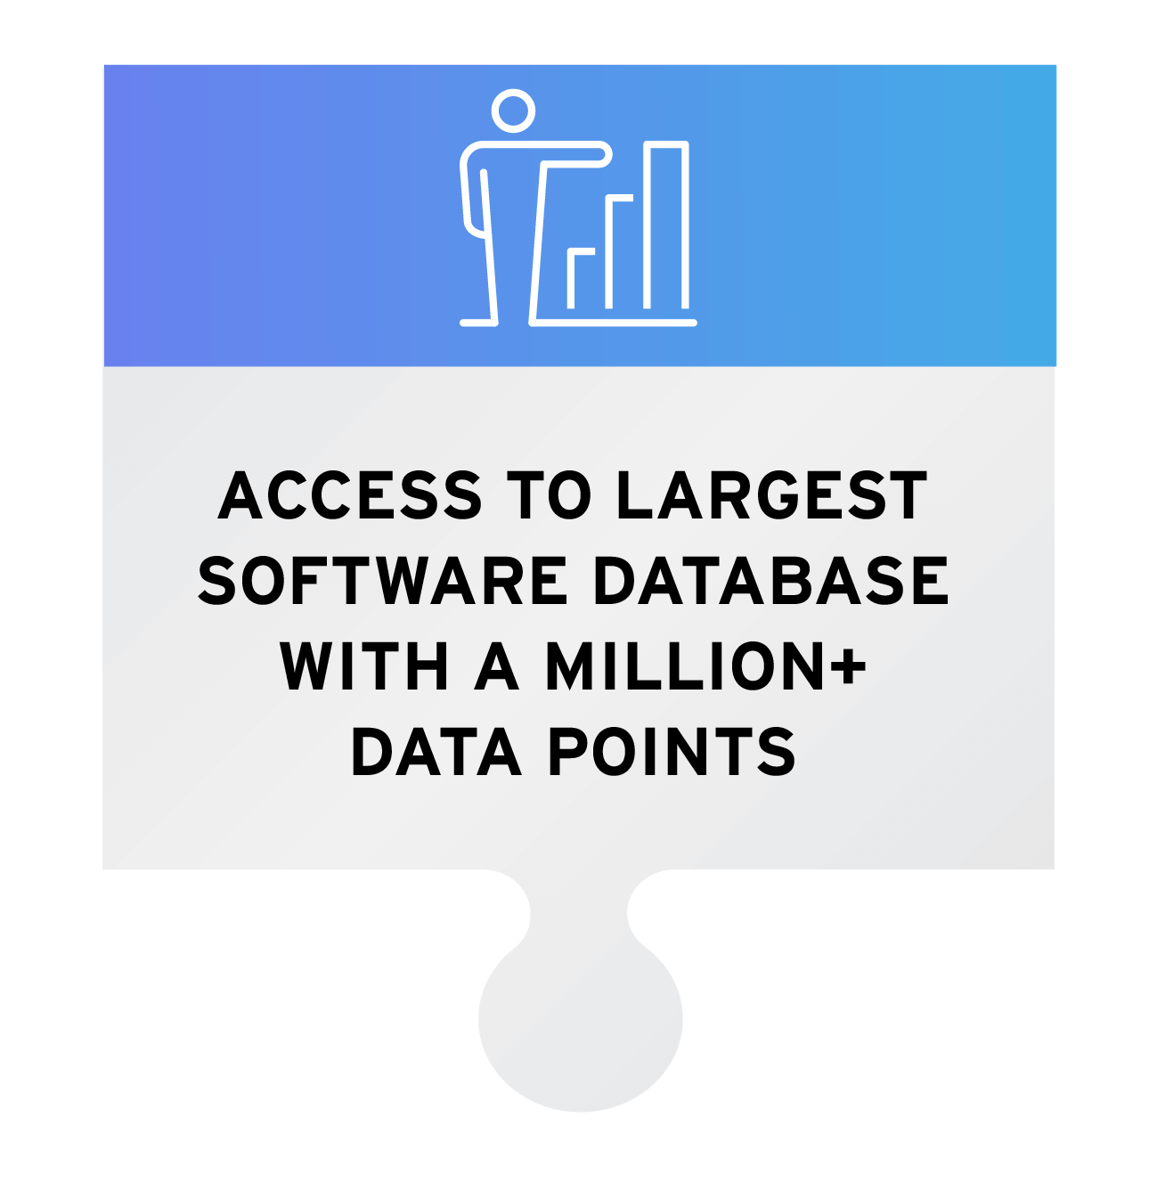 Access to largest software database with a million+ data points